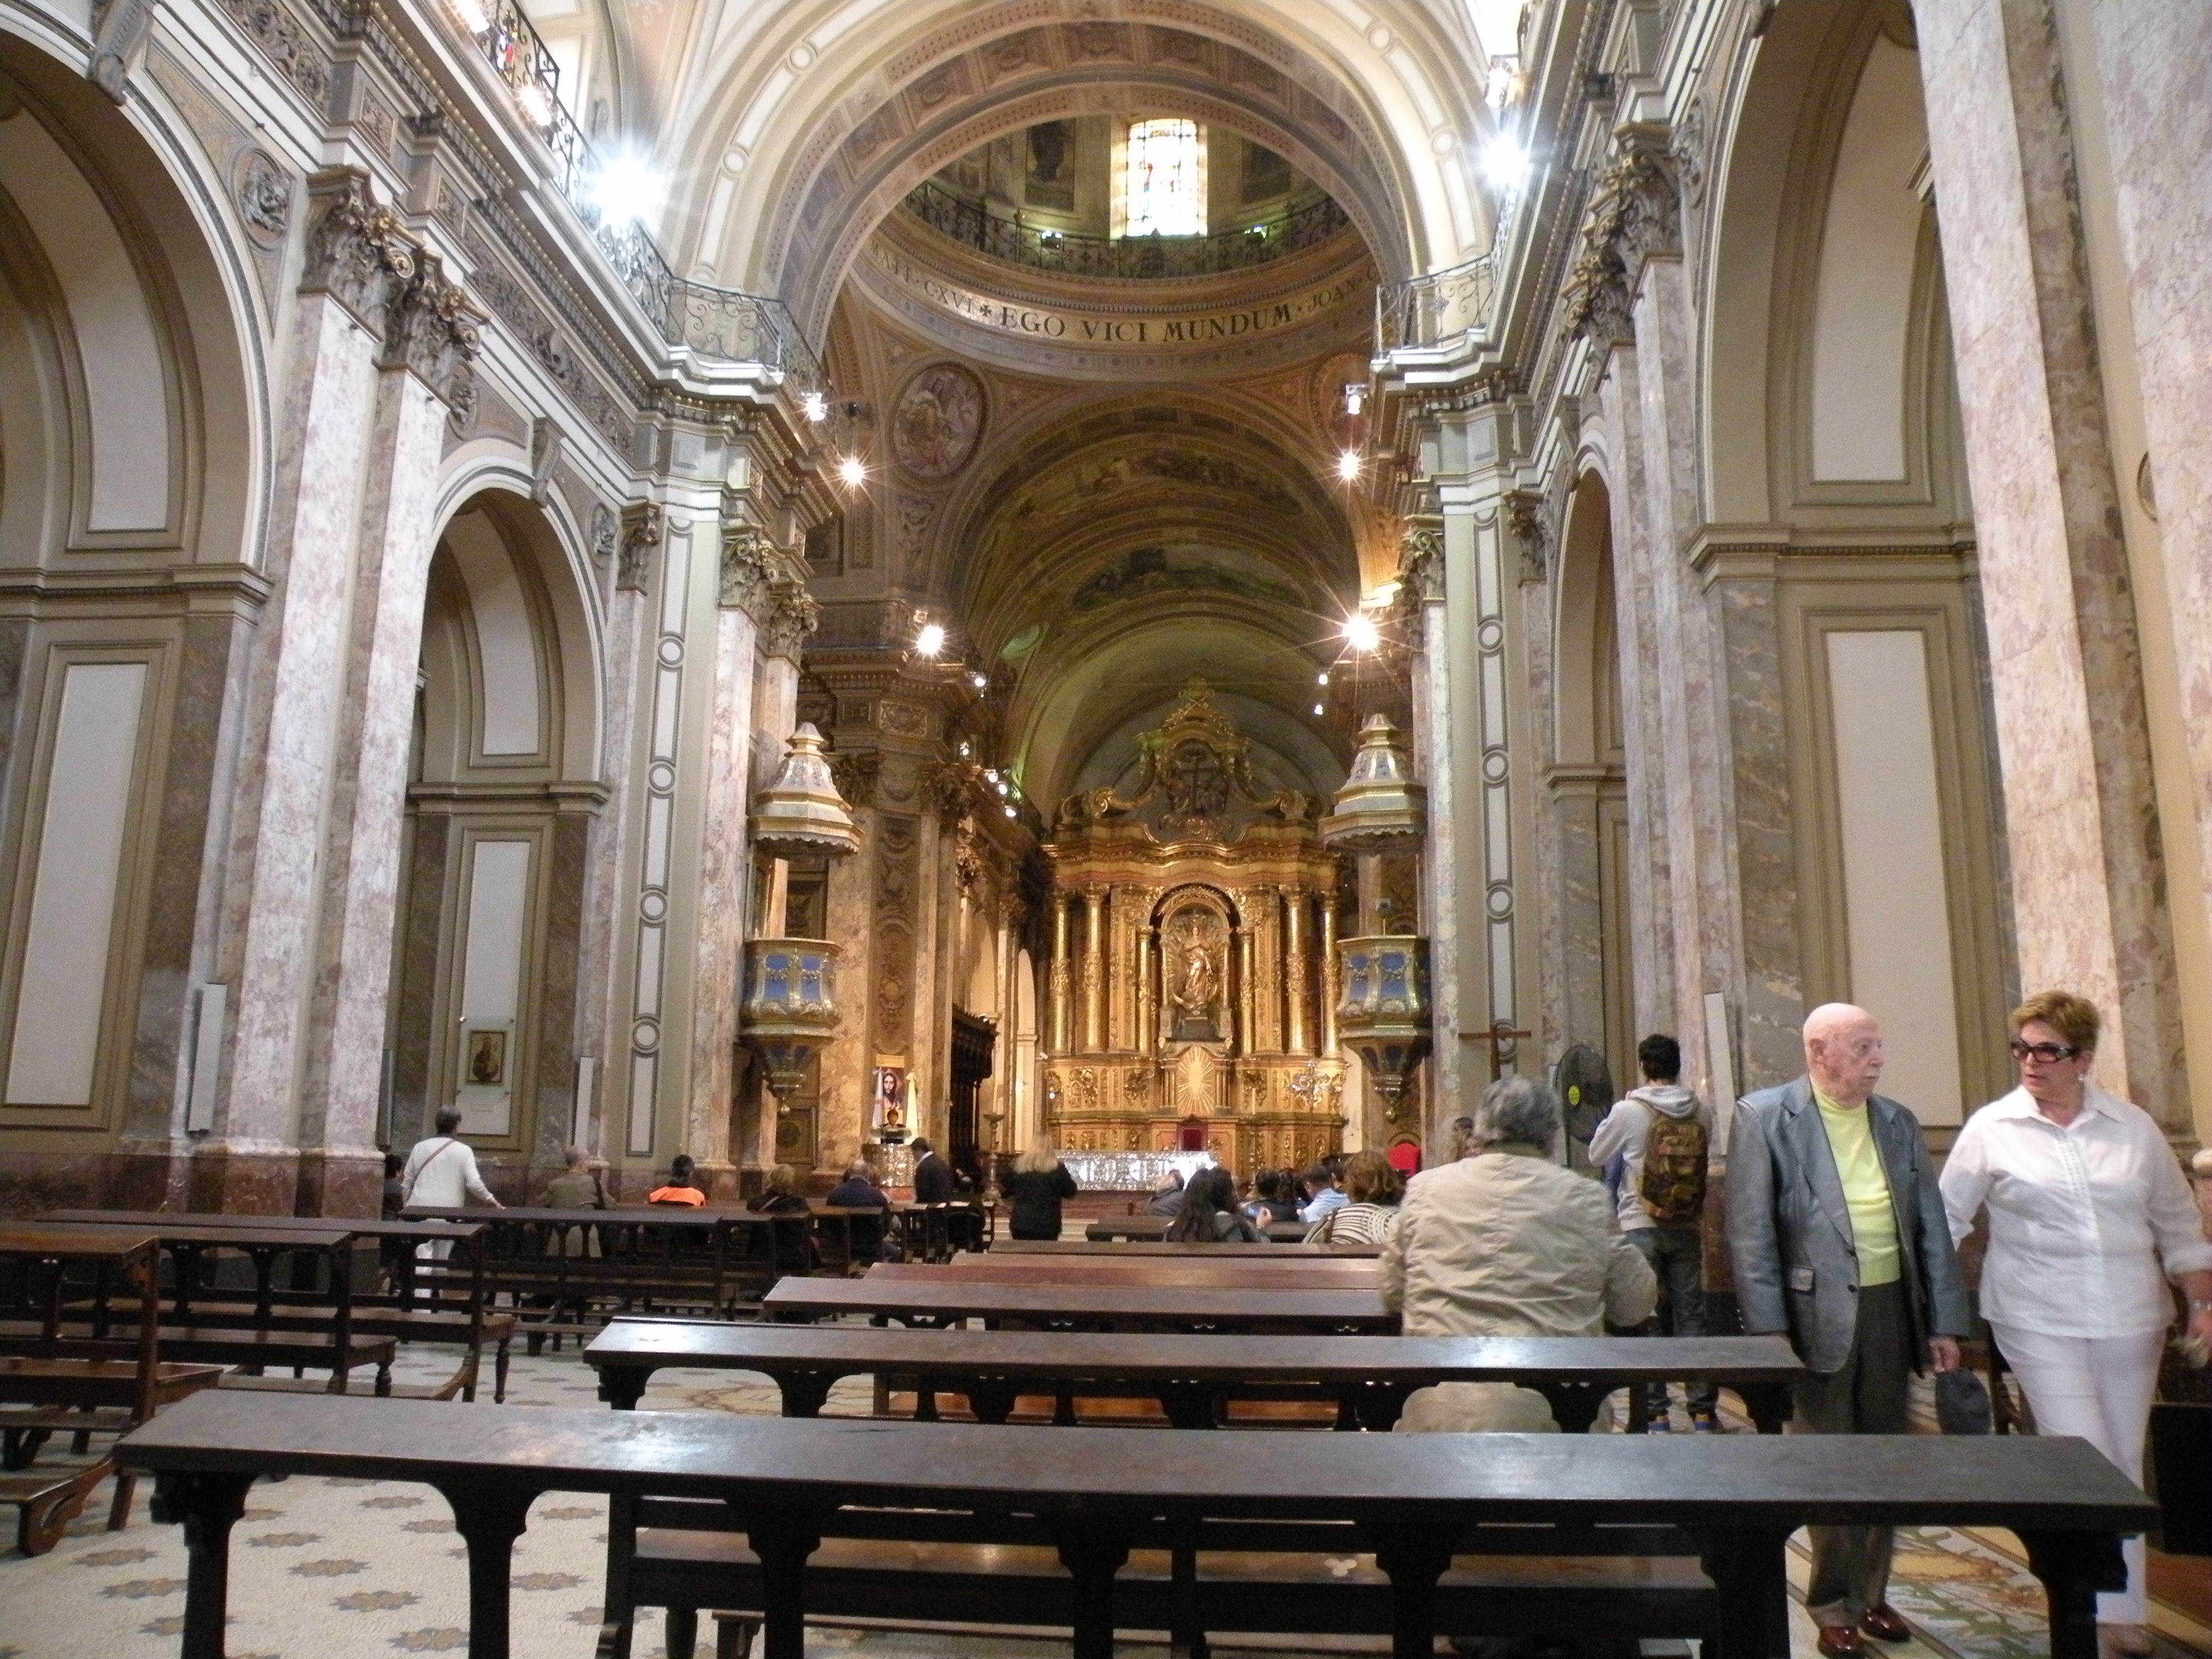 INTERIOR OF THE METROPOLITAN CATHEDRAL OF BUENOS AIRES